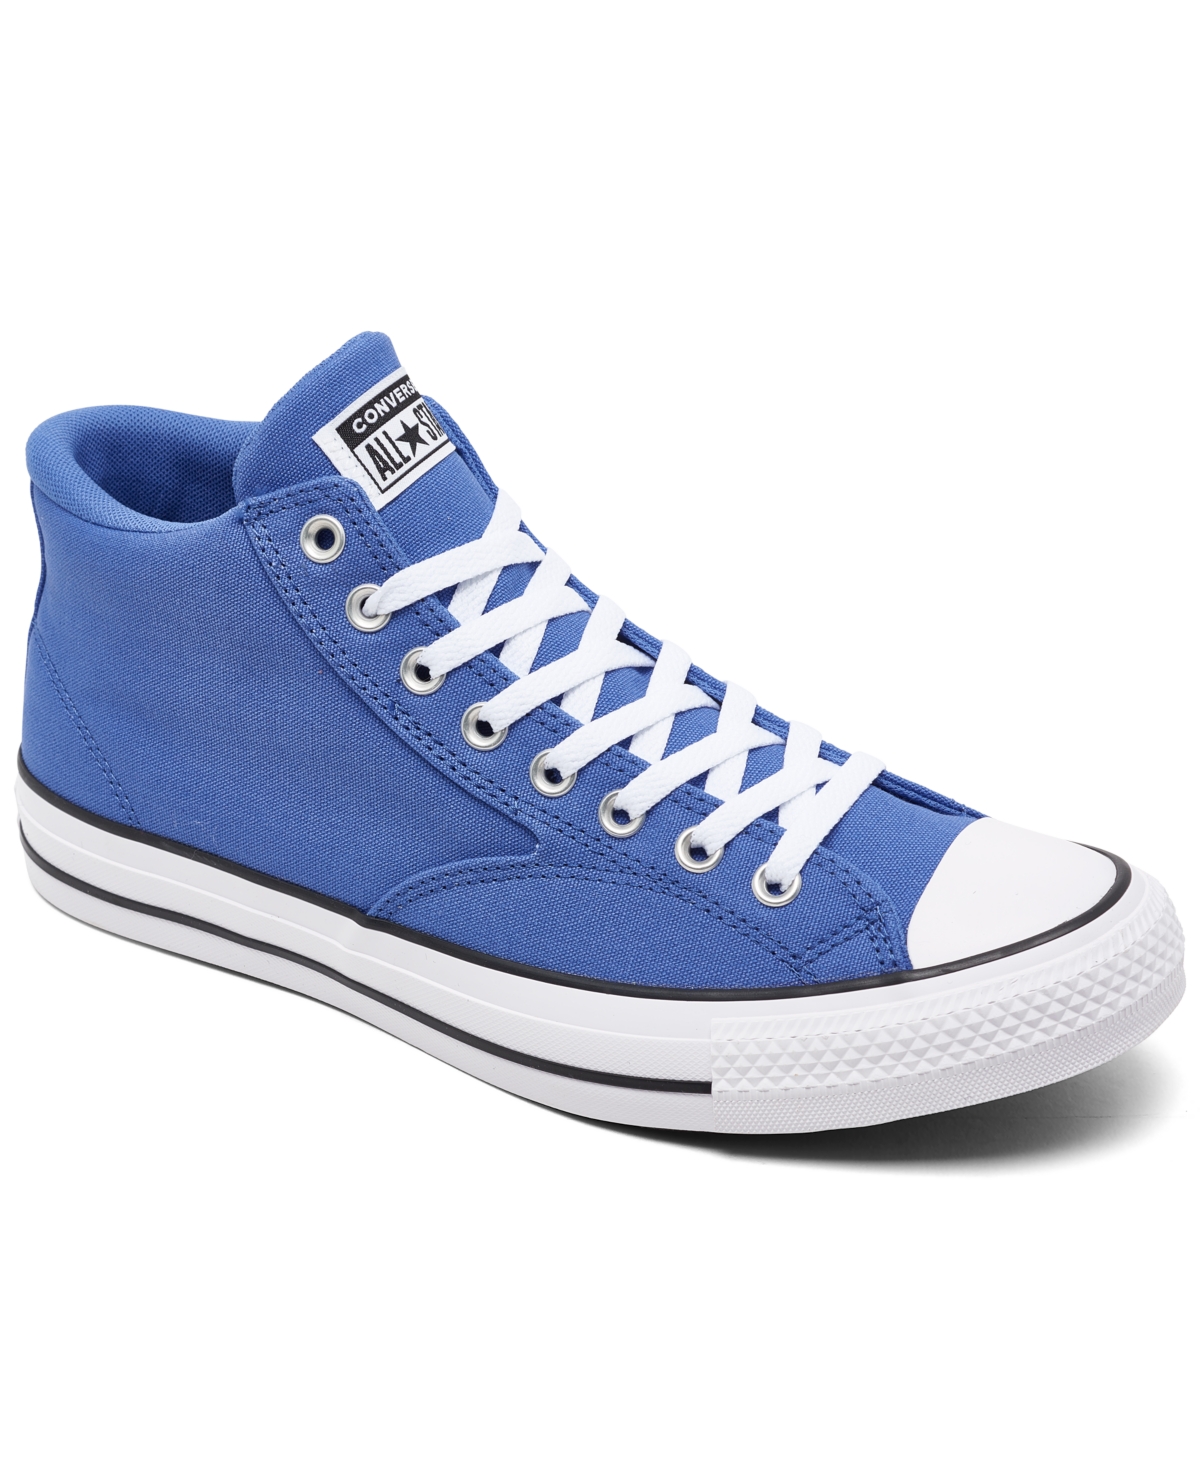 Converse Men's Chuck Taylor All Star Malden Street Vintage-like Athletic Casual Sneakers From Finish Line In Ancestral Blue,white